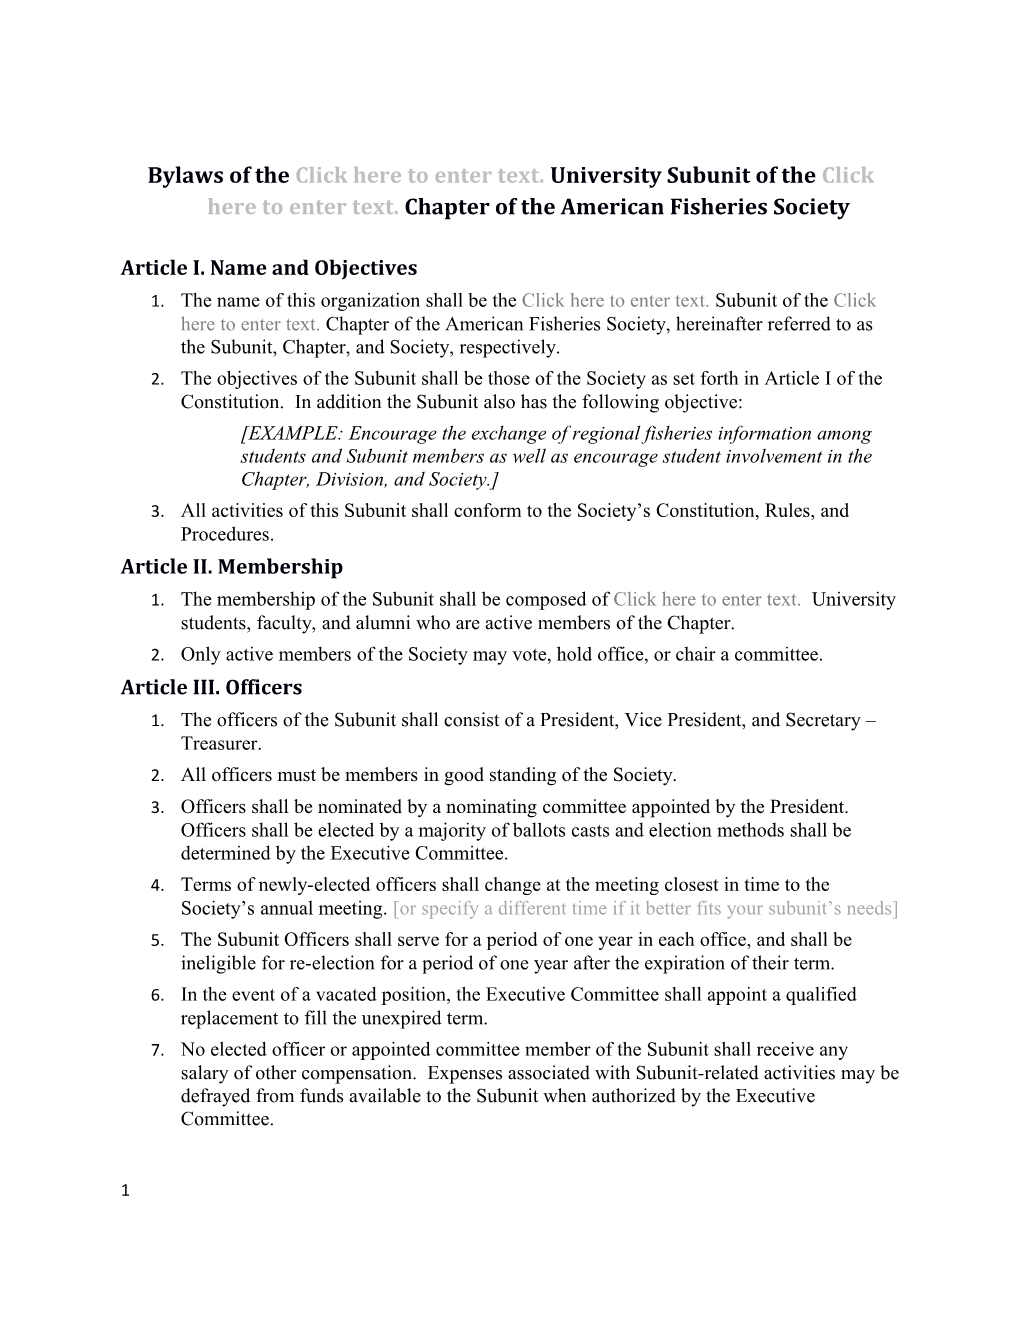 Bylaws of the Austin Peay State University Unit of the Tennessee Chapter of the American